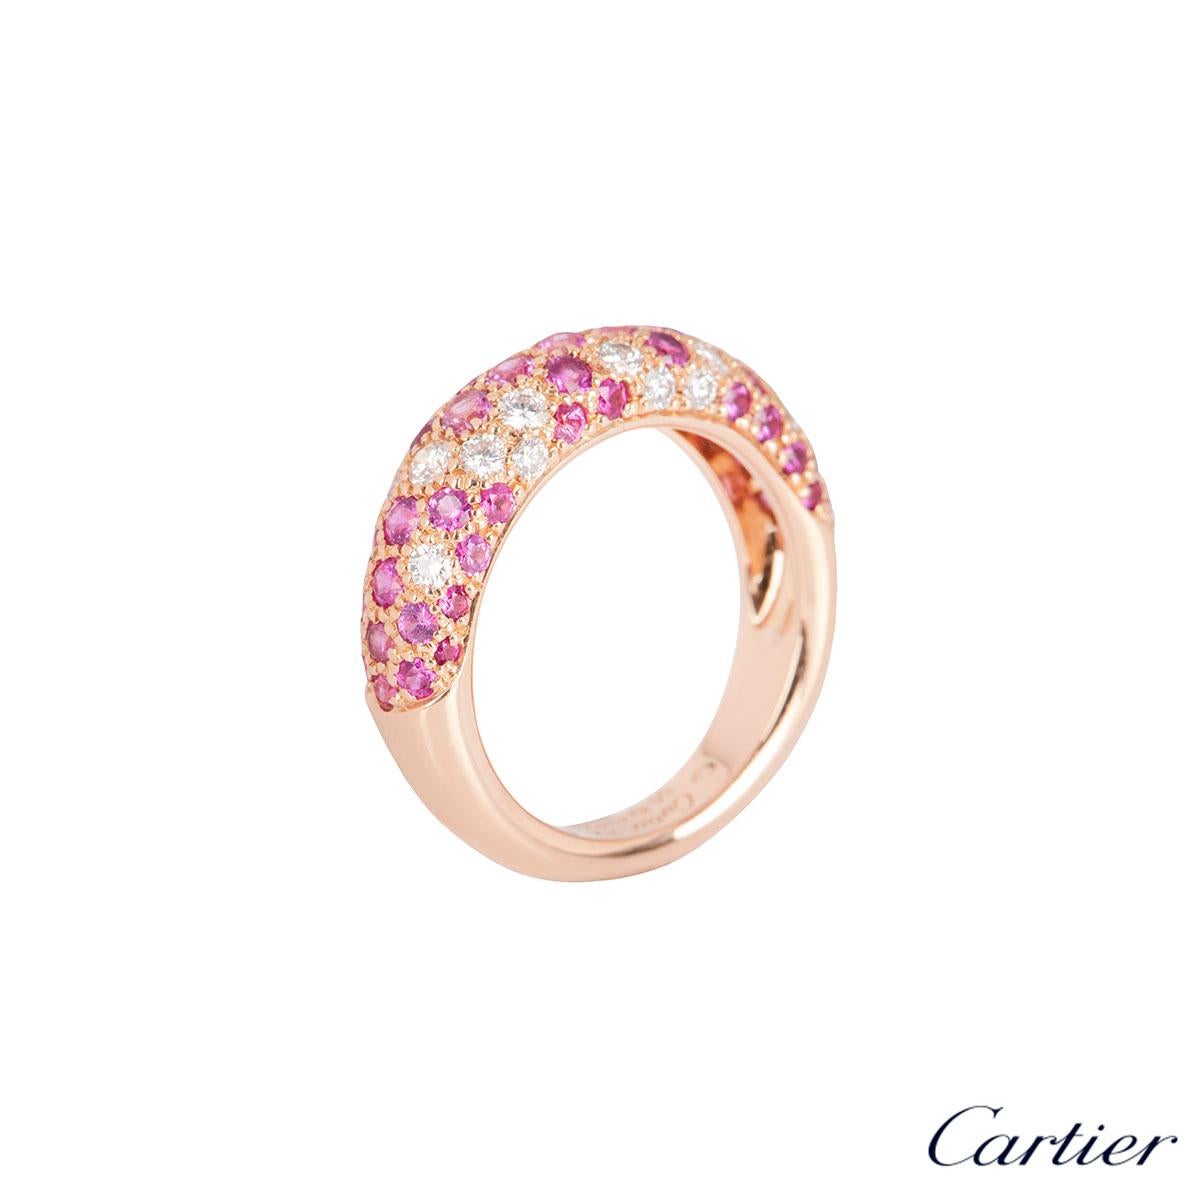 An 18k rose gold diamond and sapphire ring by Cartier from the Etincelle collection. The ring comprises of pave set pink sapphire and round brilliant cut diamonds alternating in formation half set across the band. The diamonds have an approximate